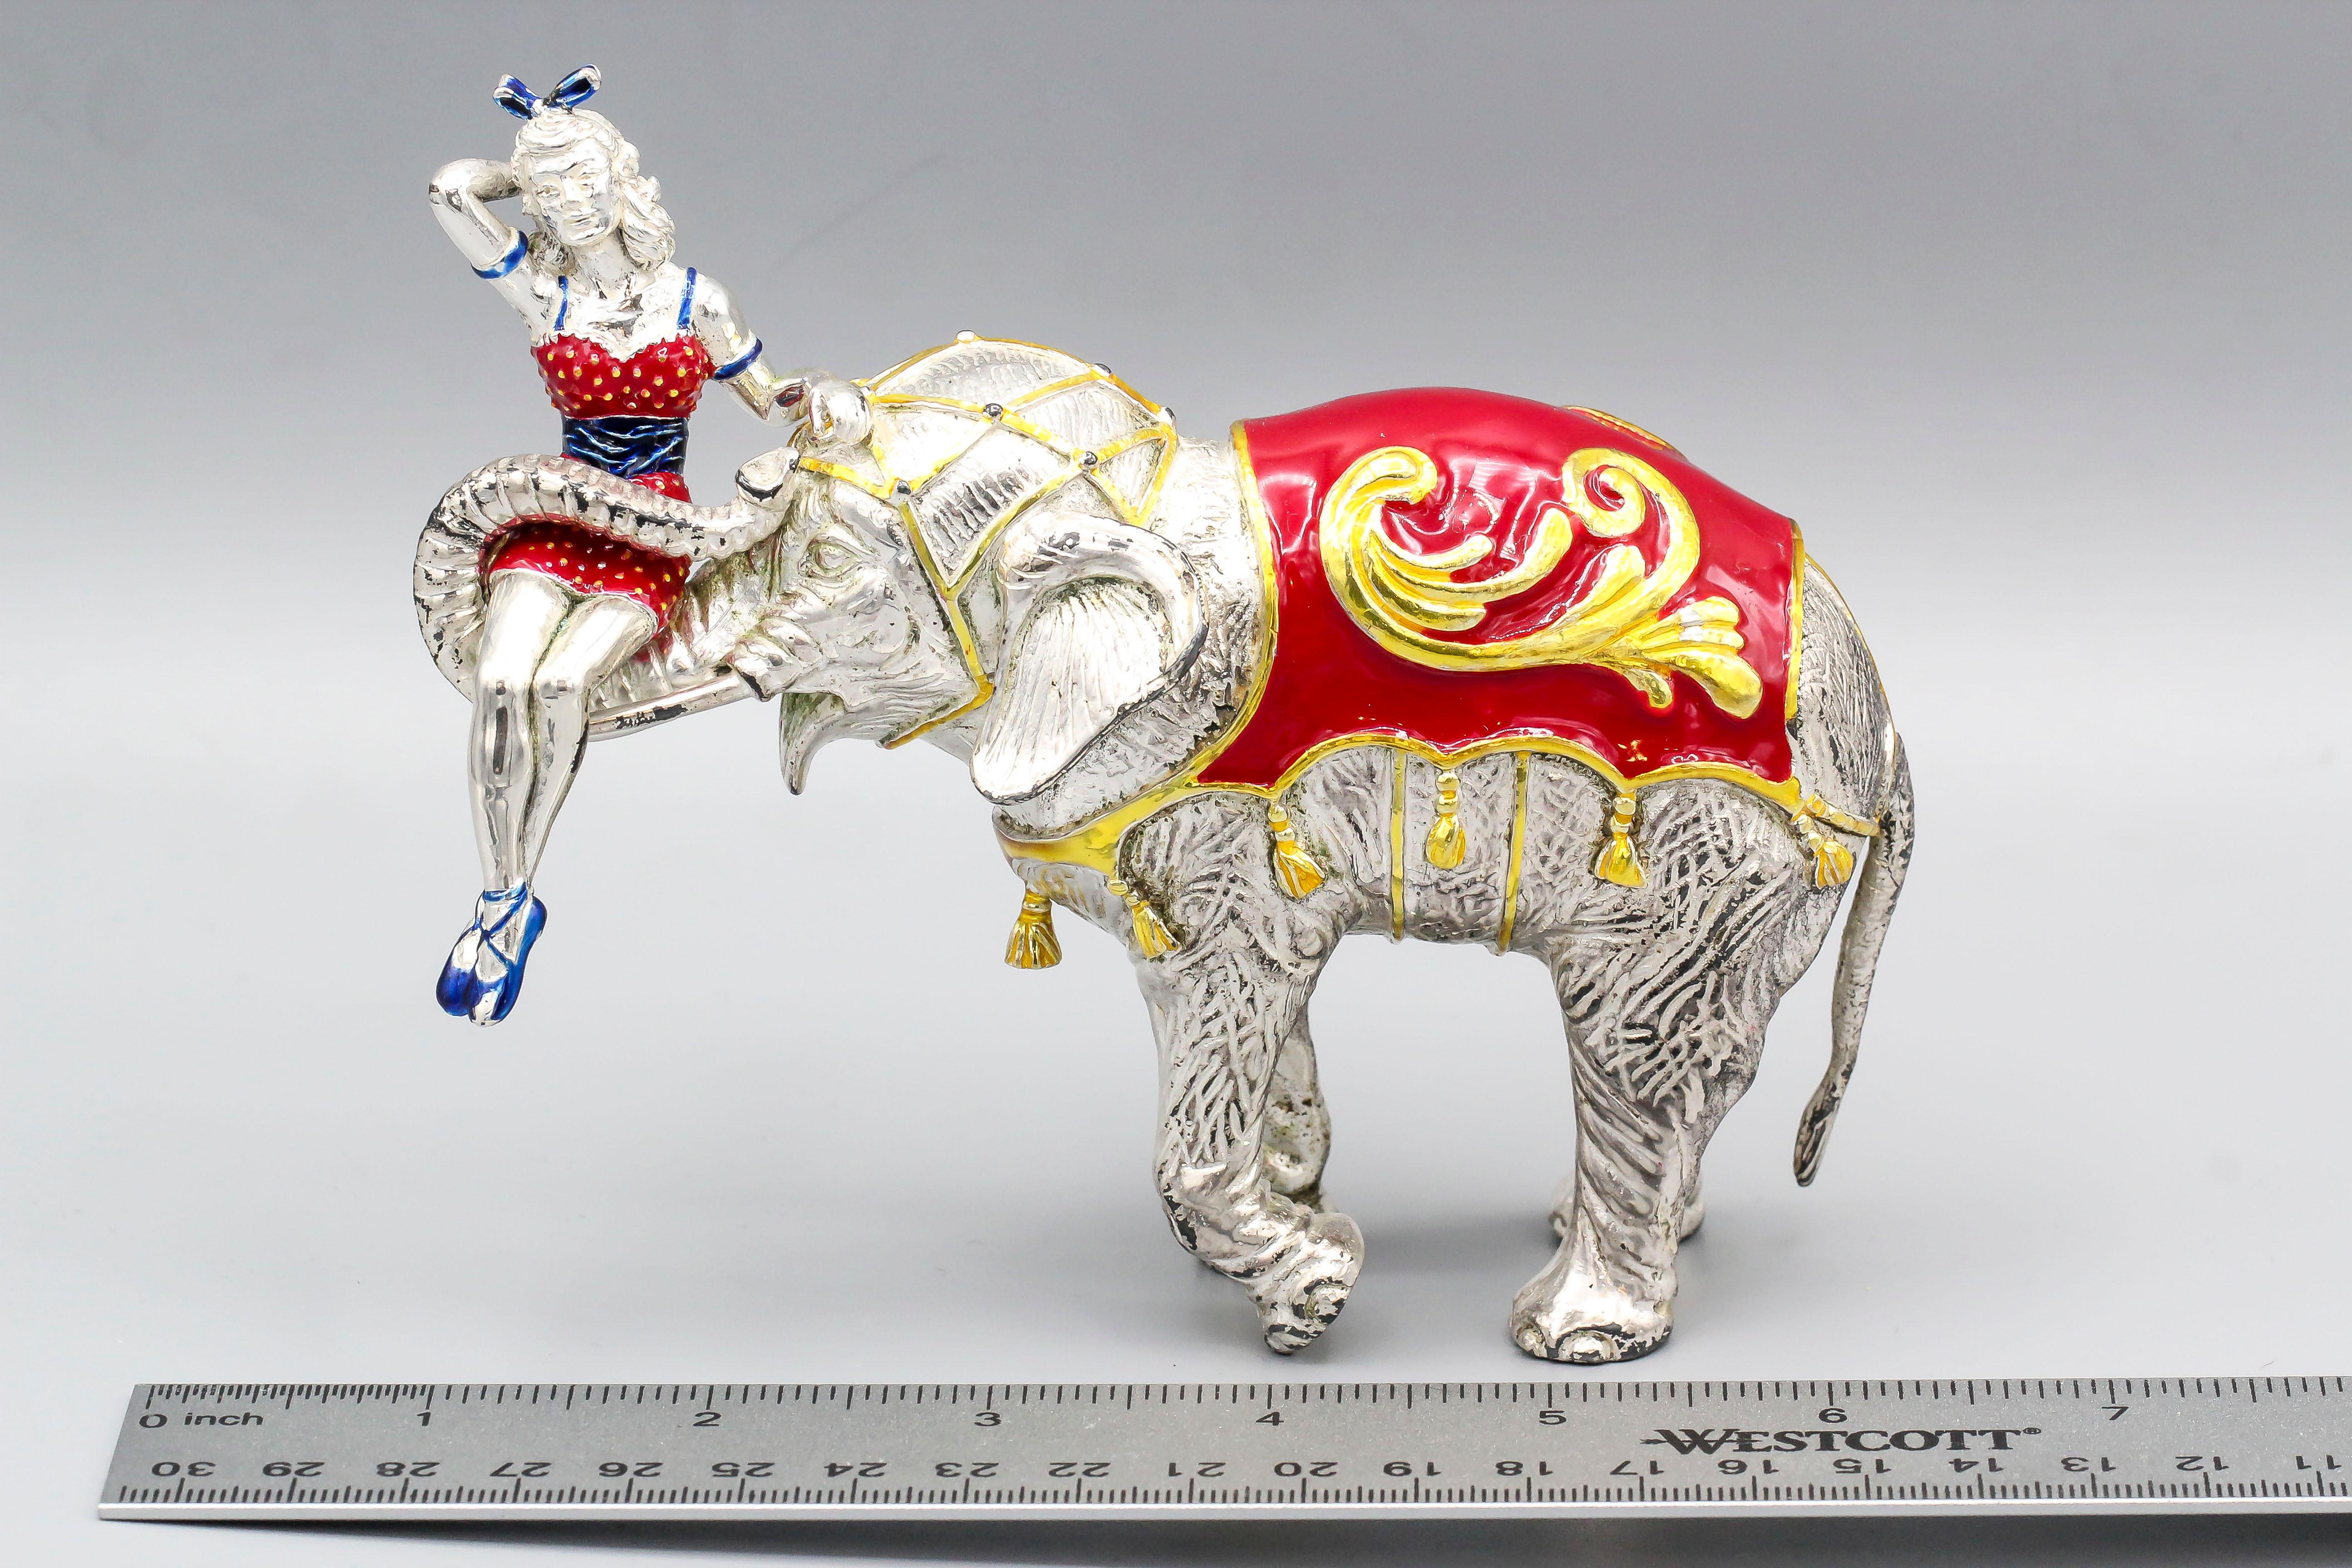 Rare and unusual sterling silver and multi colored enamel circus figurine by Tiffany & Co., circa 1990s. It features an elephant with a showgirl sitting on its trunk.  This is a rarer figurine in that it is larger and heavier than other elephant